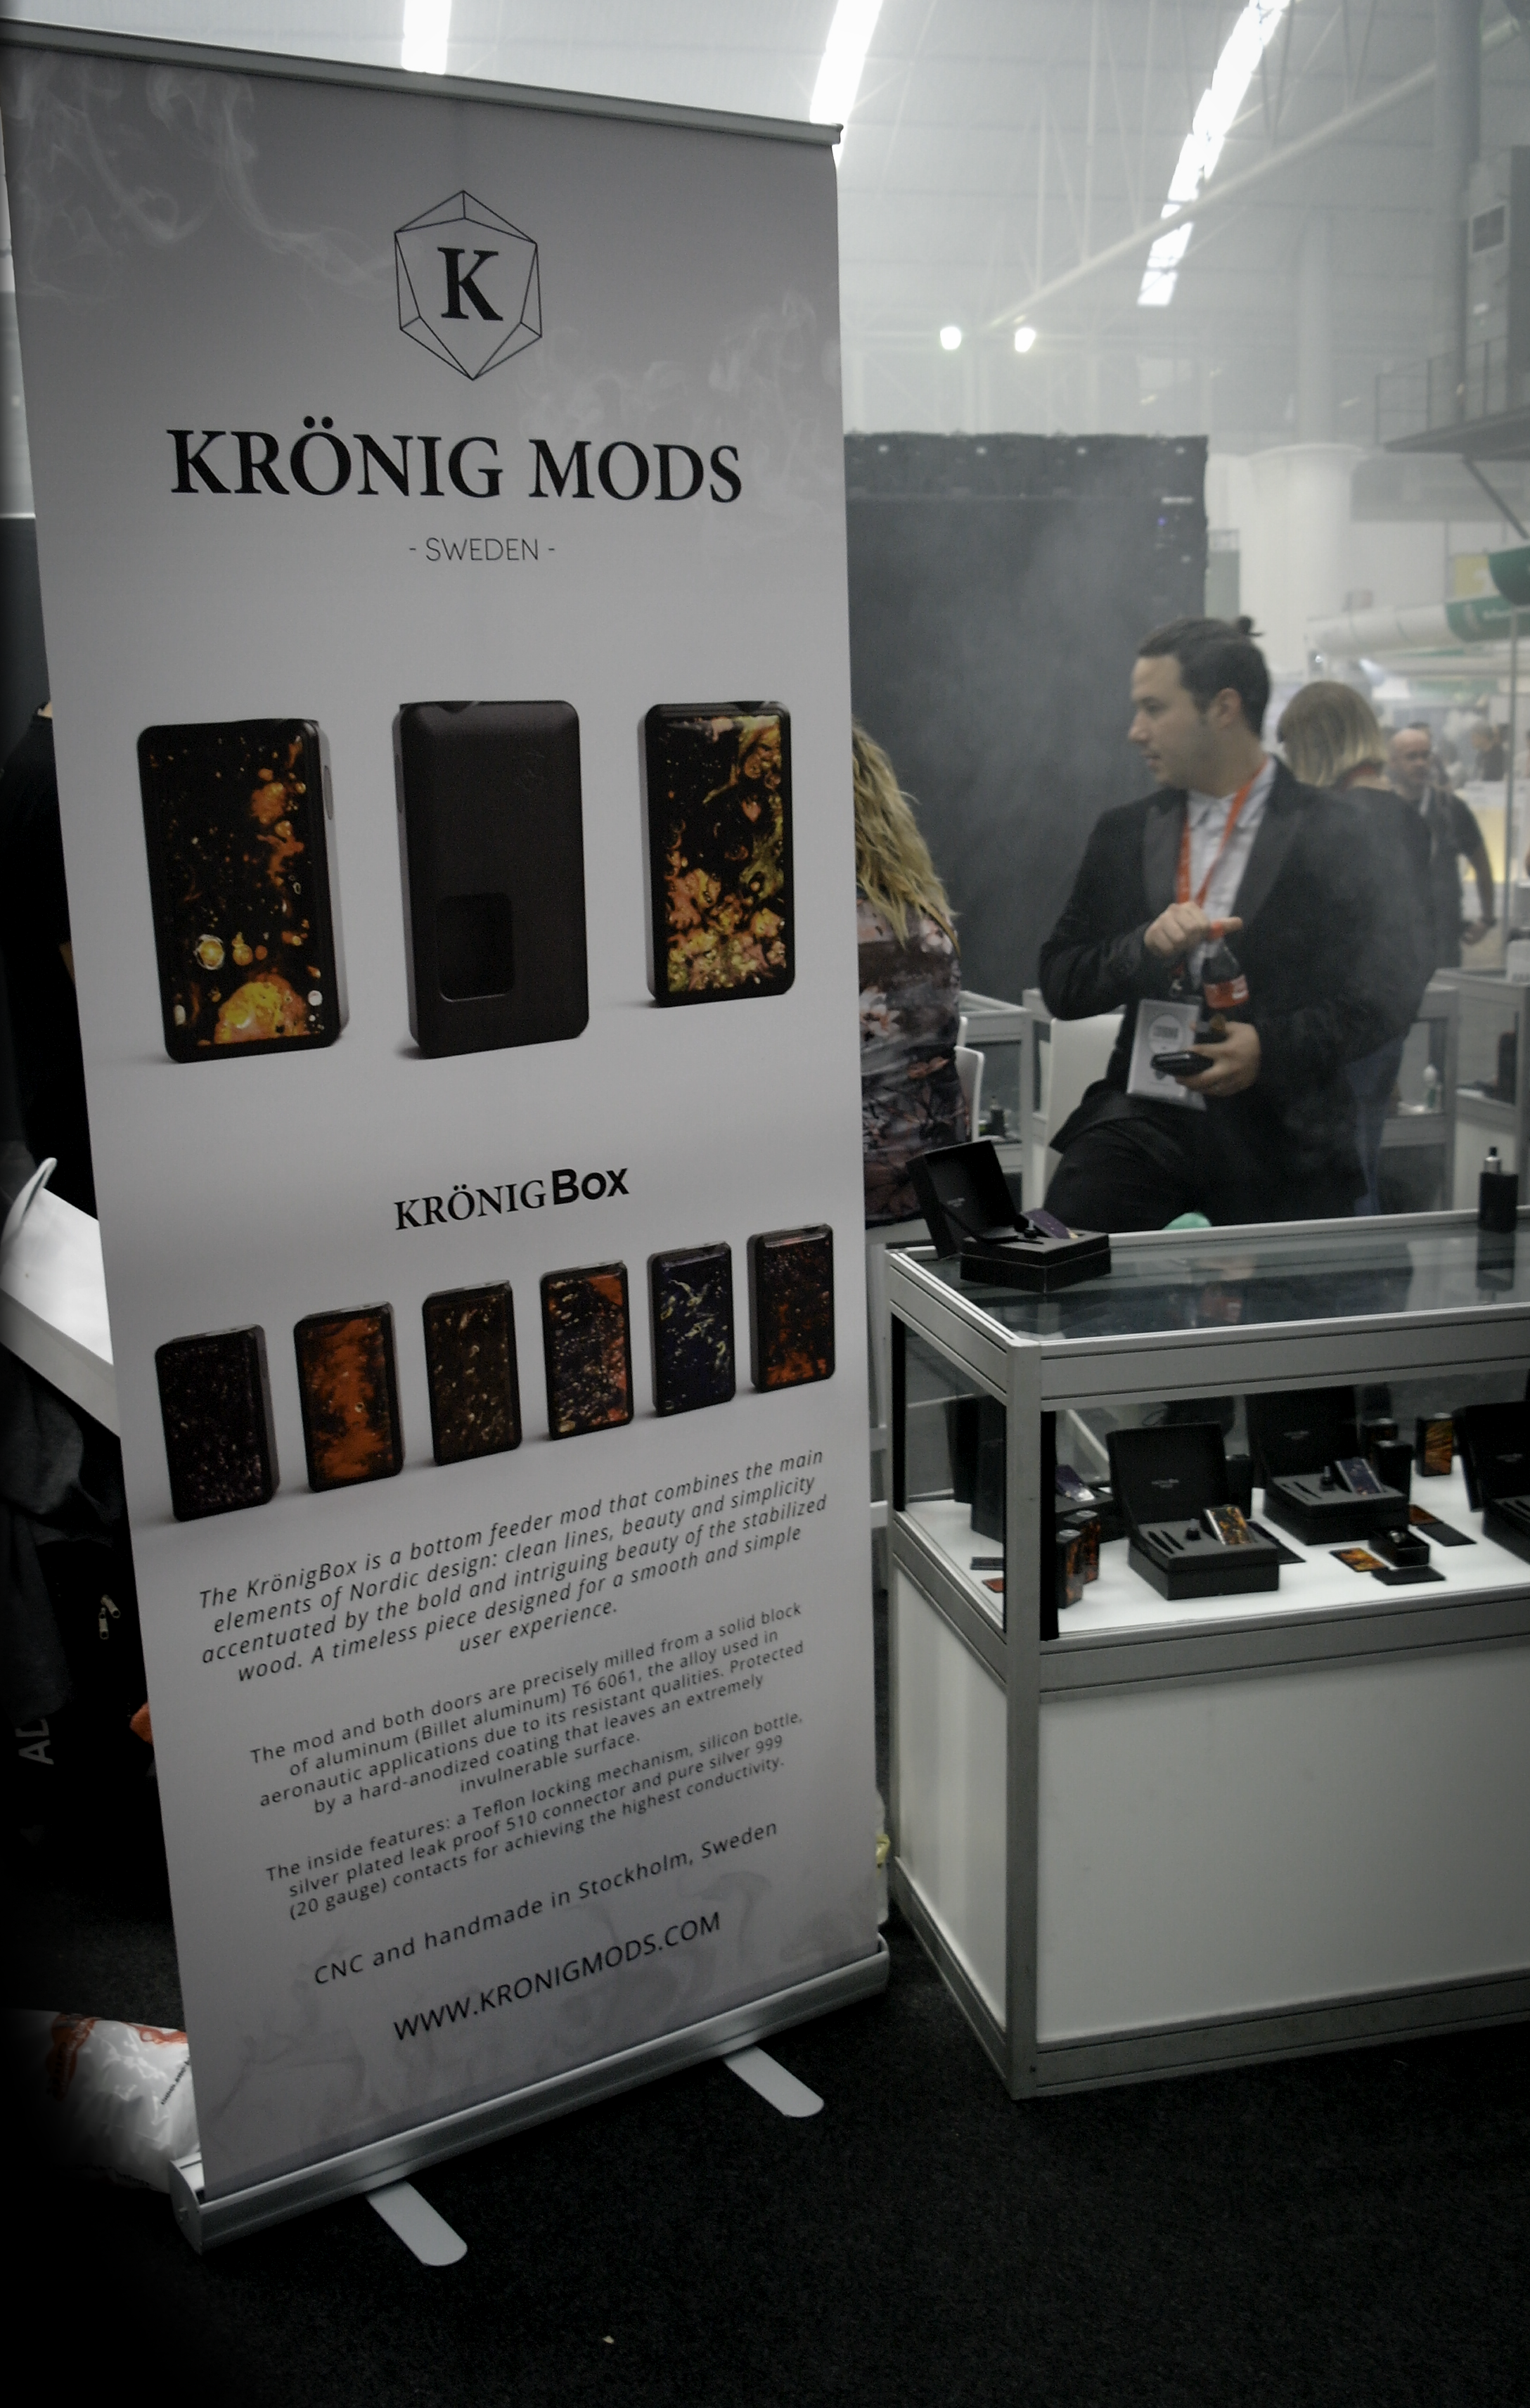 The KronigMods rollup in Vape Expo BCN